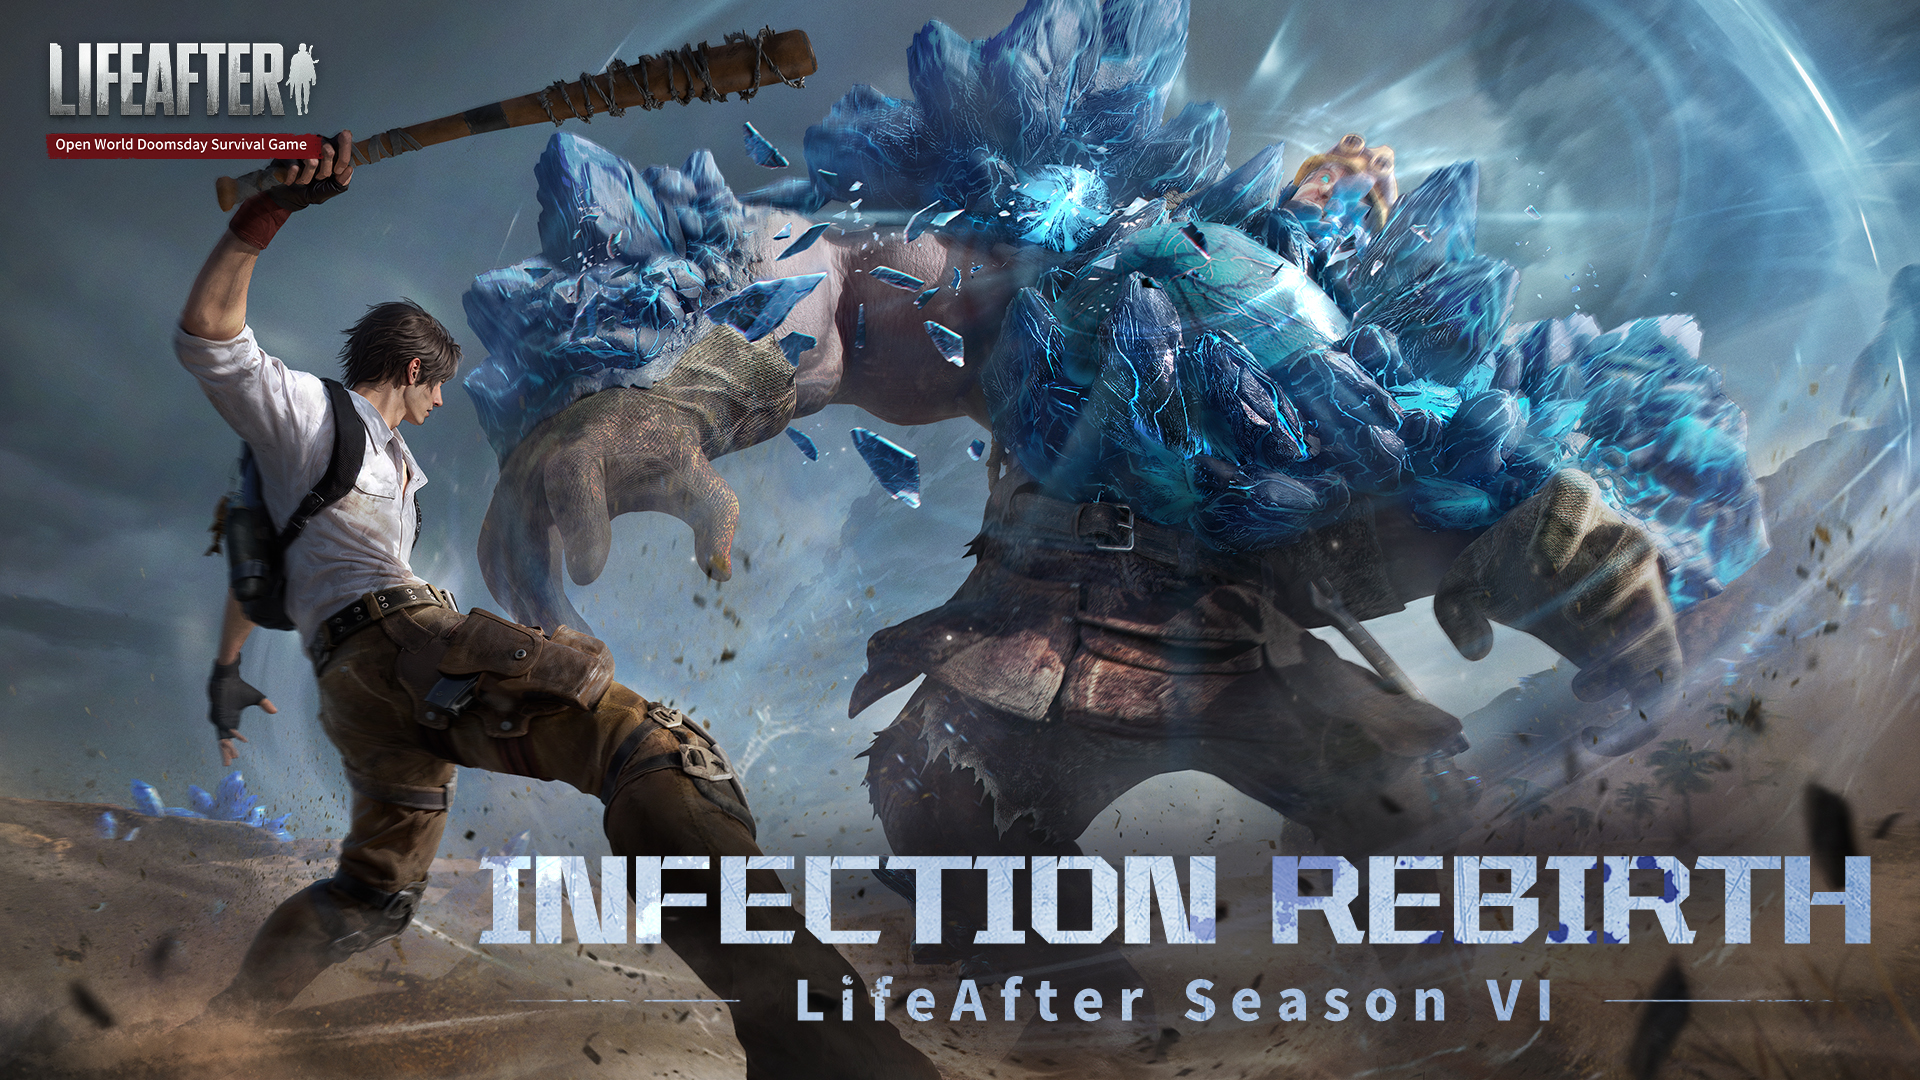 Season 4: Infection Preview Livestream